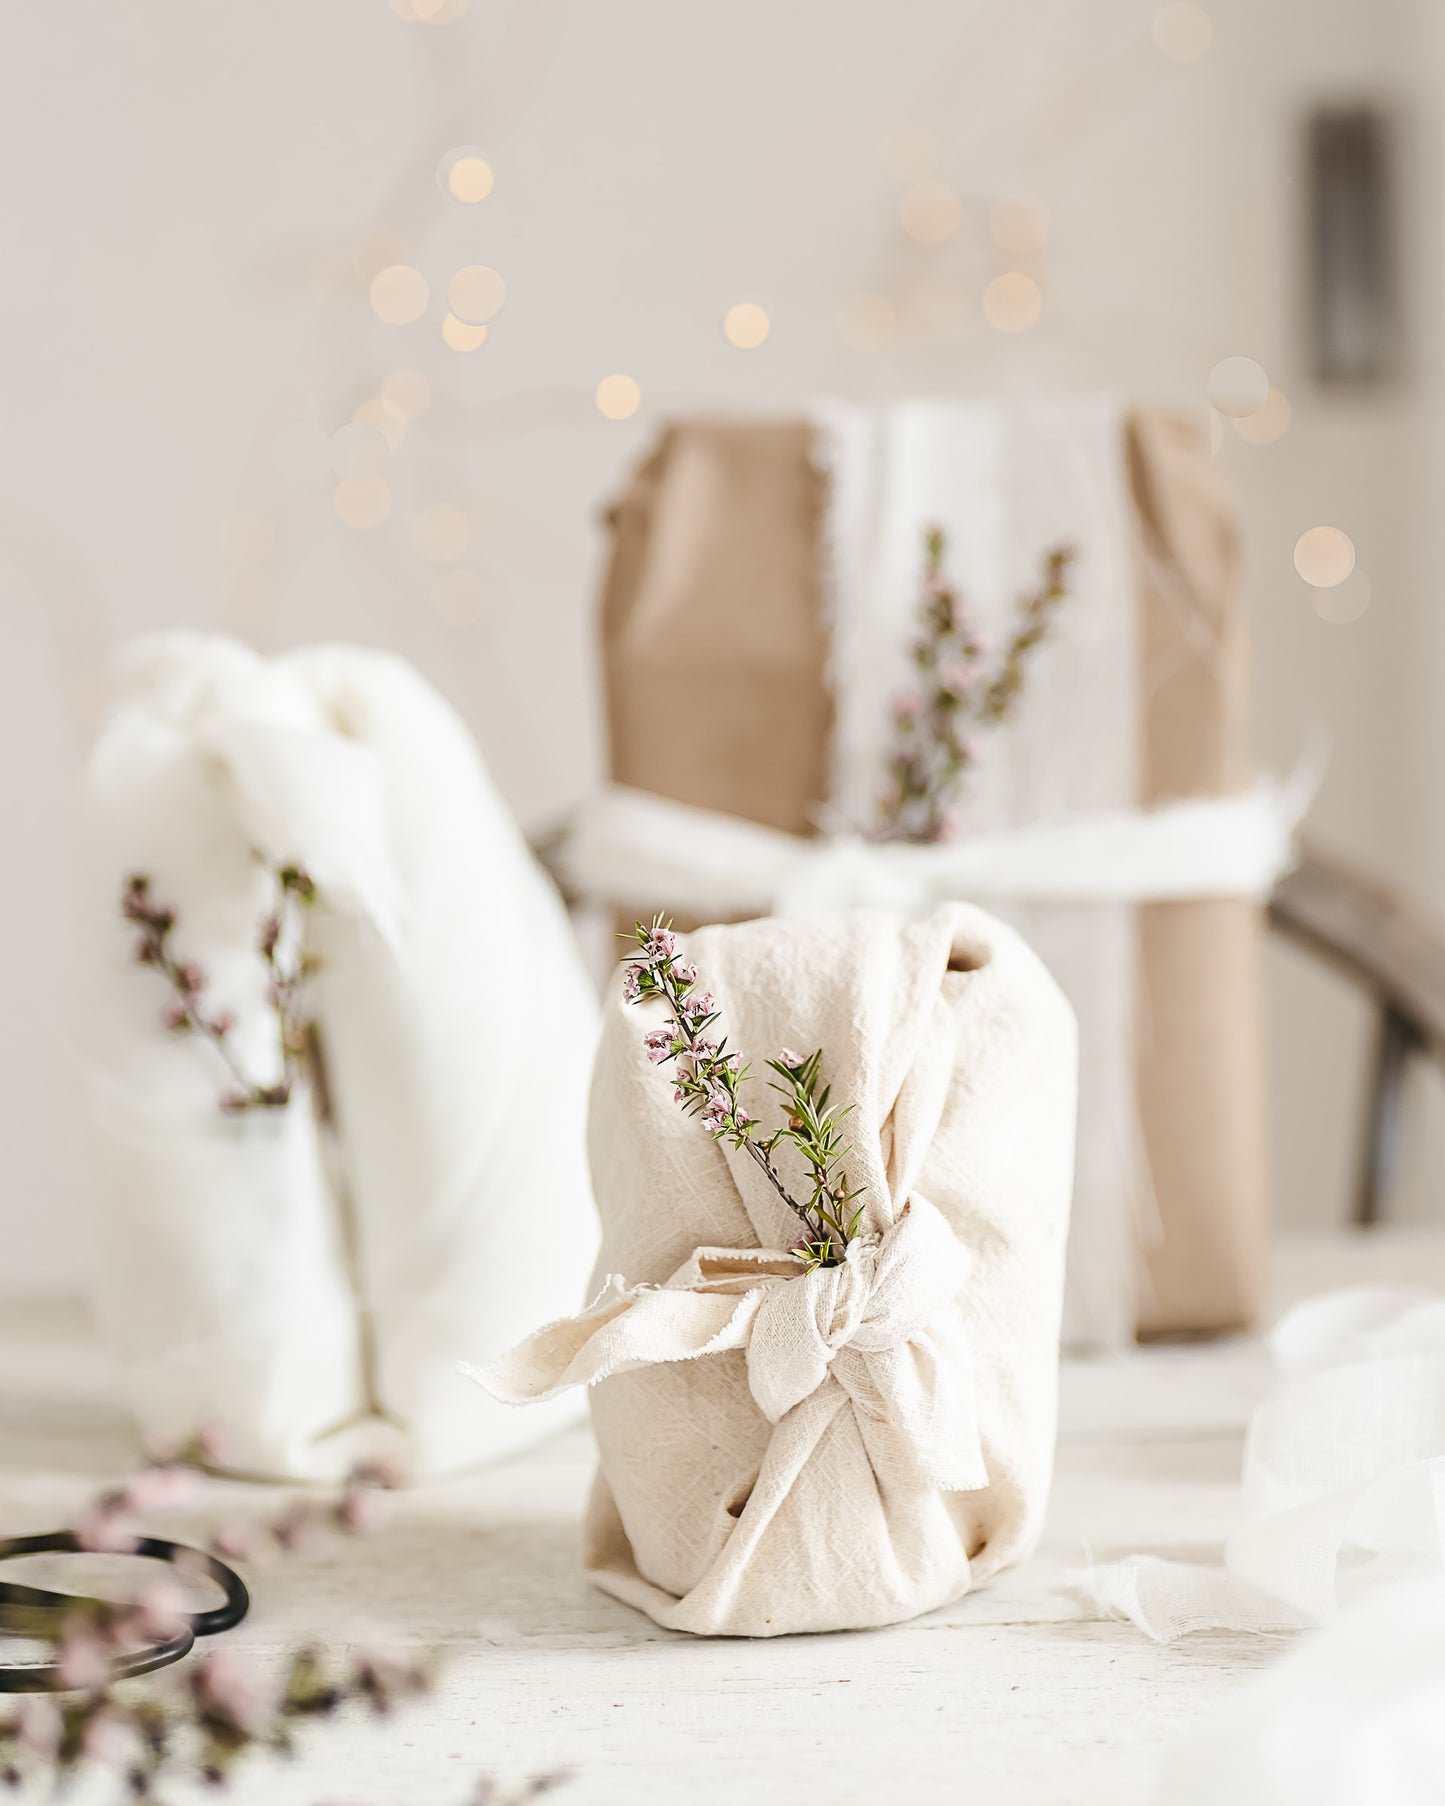 6 Simply Gorgeous Homemade Gifts For Christmas